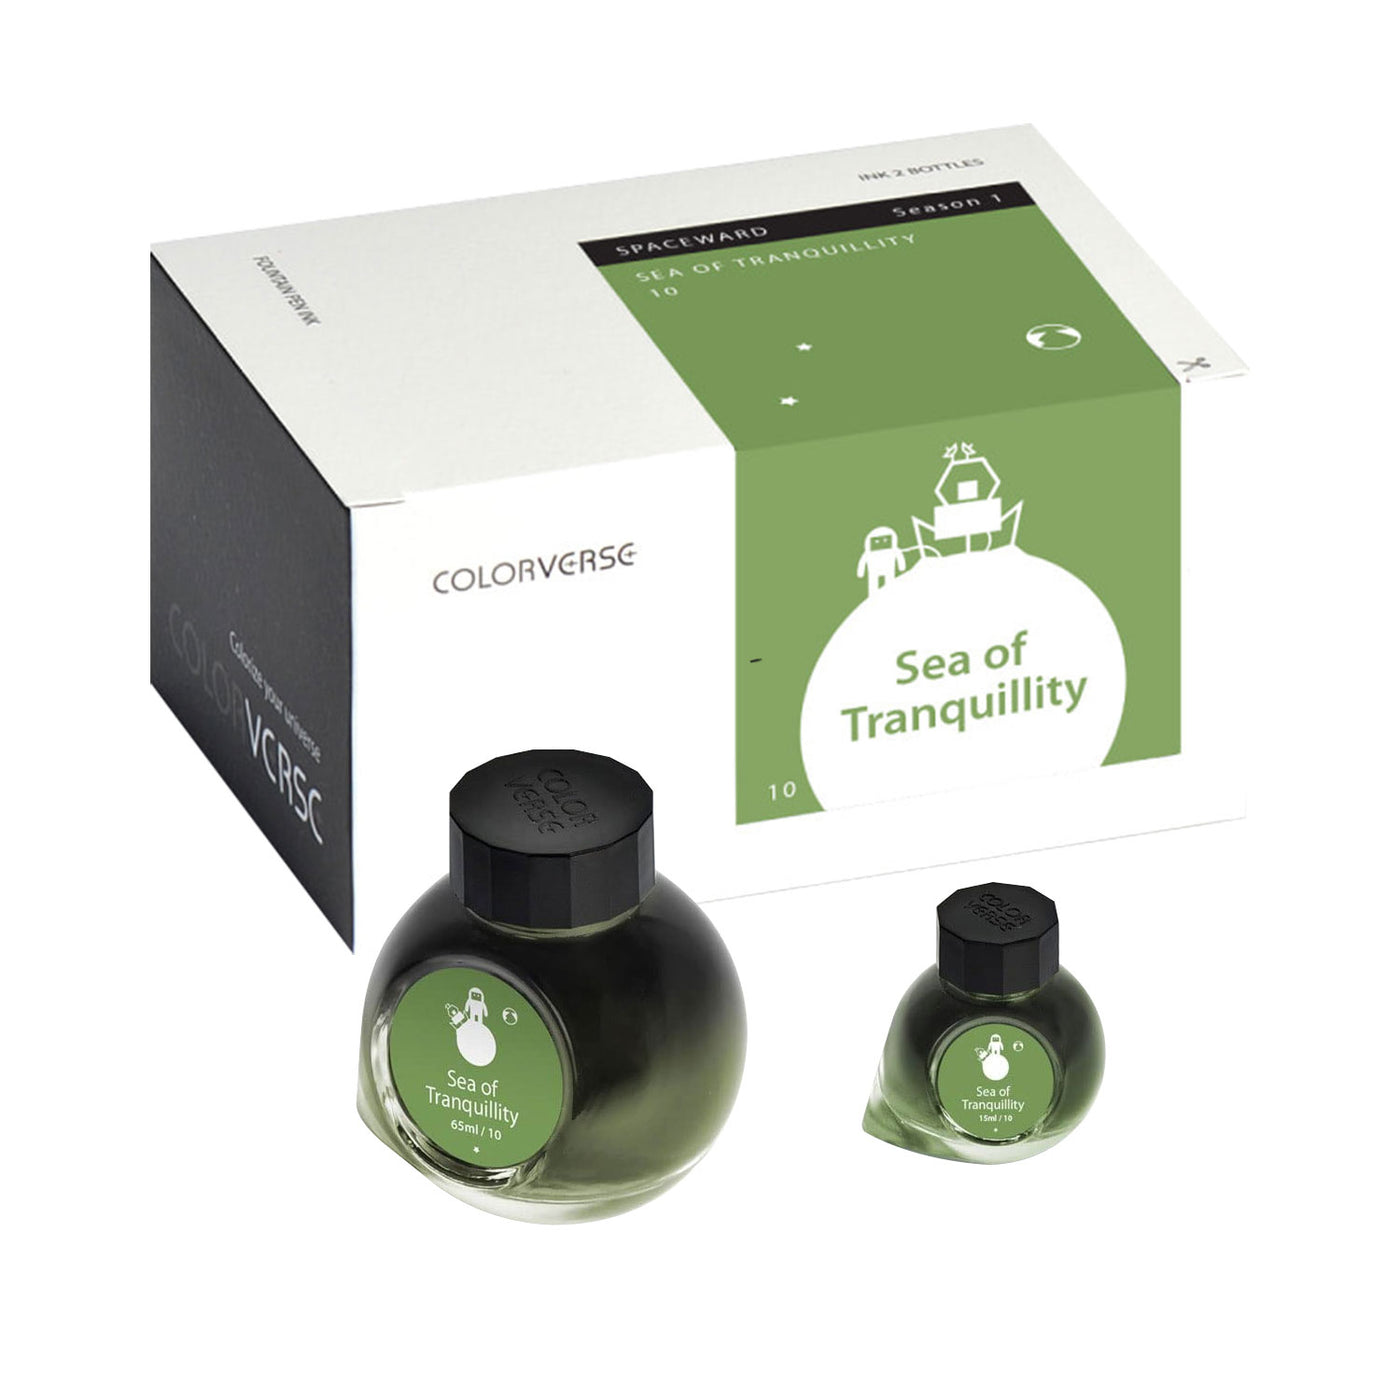 Colorverse Spaceward Sea of Tranquility Ink Bottle Green - 65ml + 15ml 3